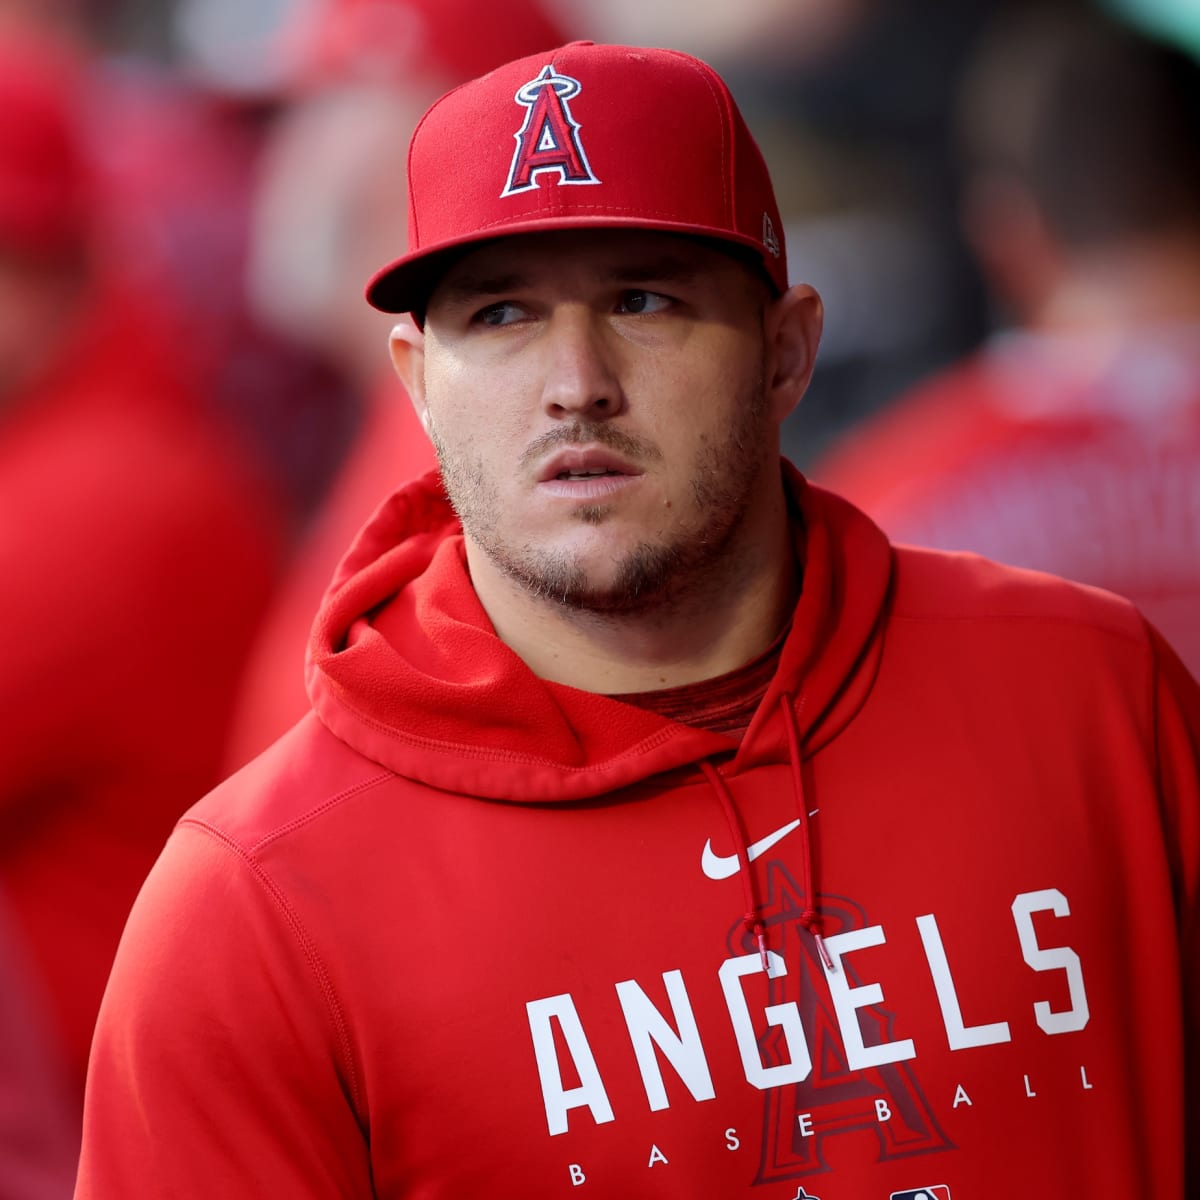 Mike Trout still 'feeling something' in calf, to see doctor Monday